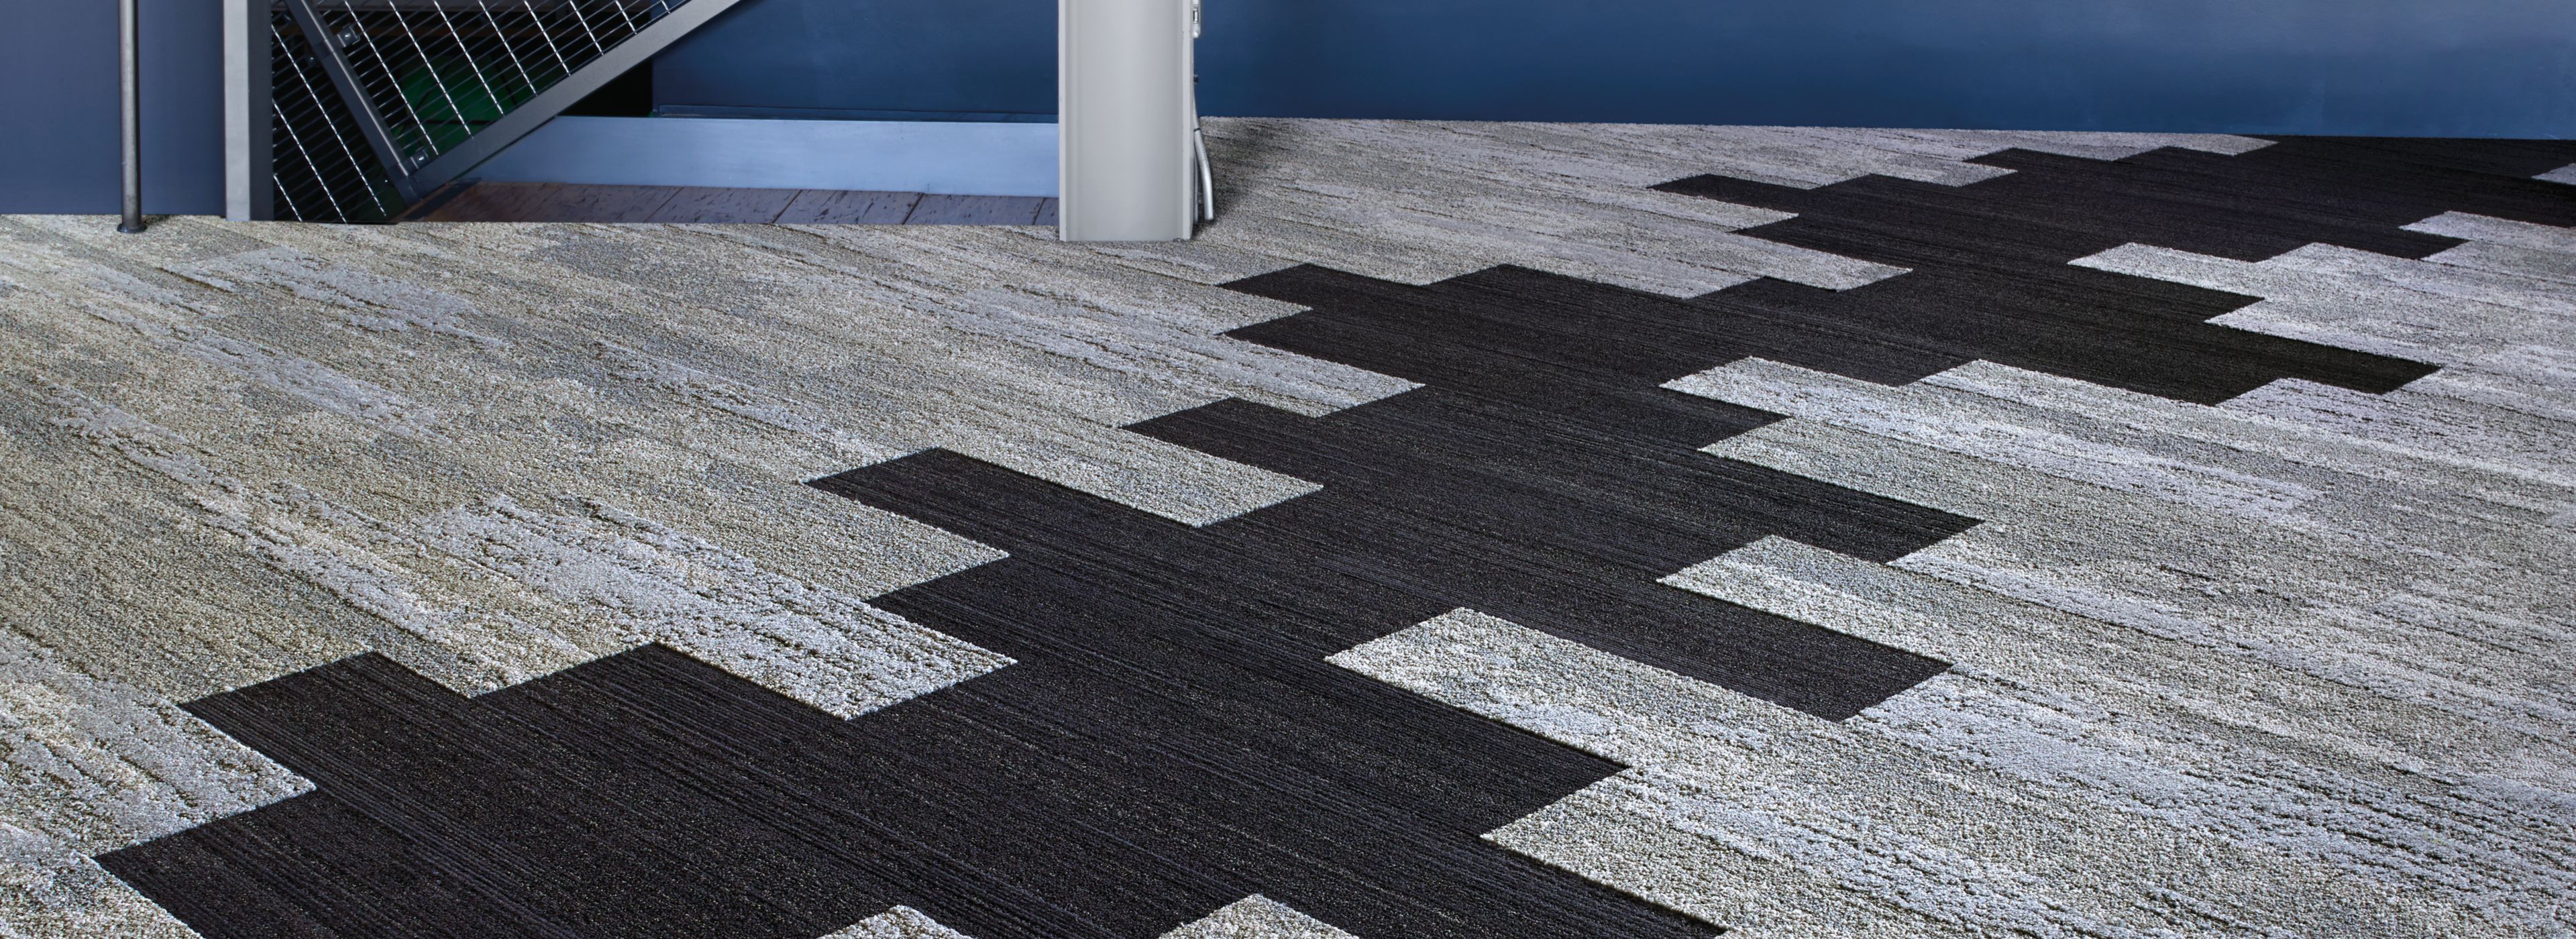 Interface NF400 and NF401 plank carpet tile in a corridor or entryway of a public space image number 1